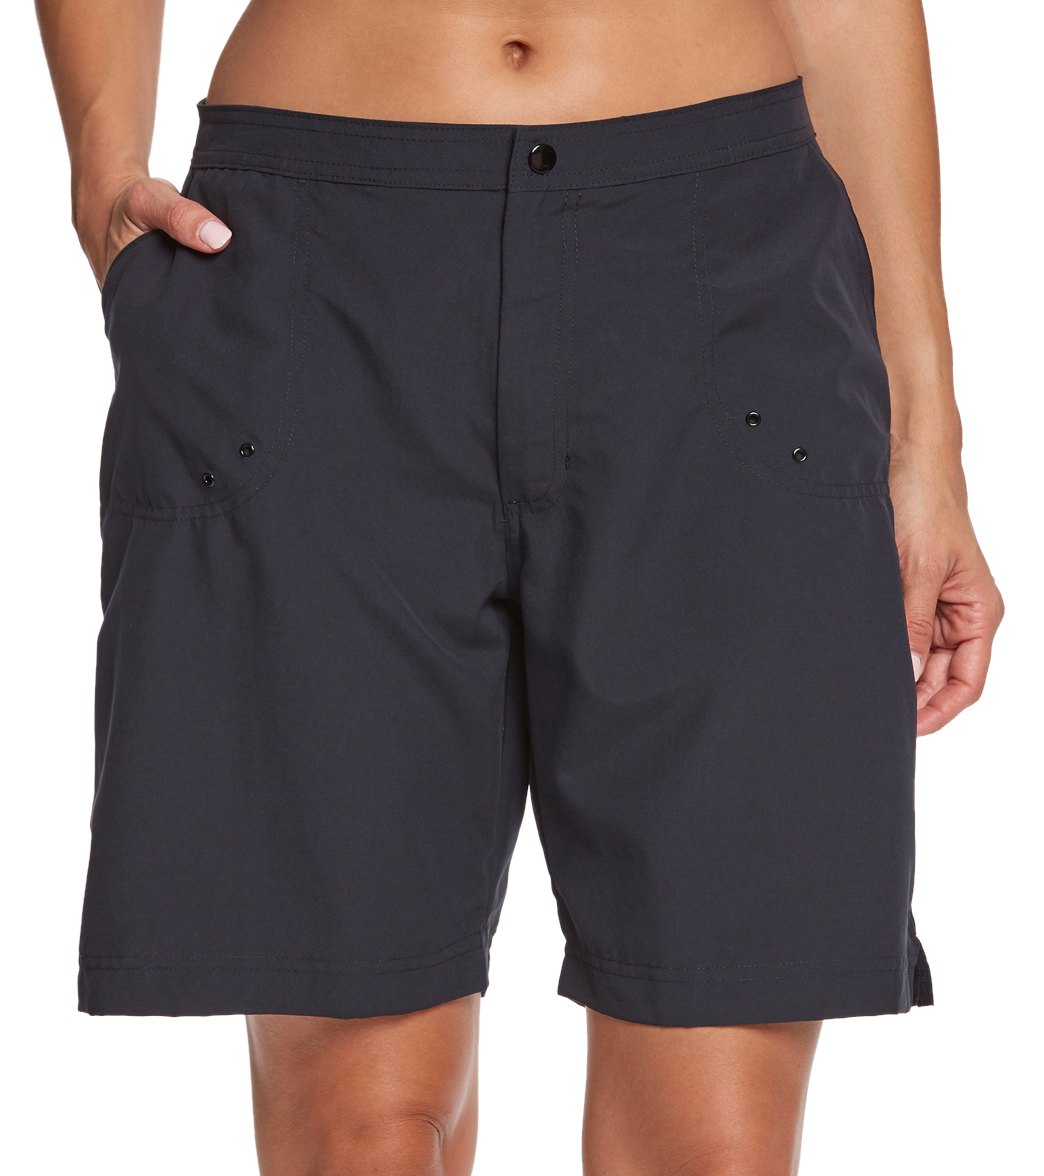 Maxine Women's Solid Woven Long Boardshort at SwimOutlet.com